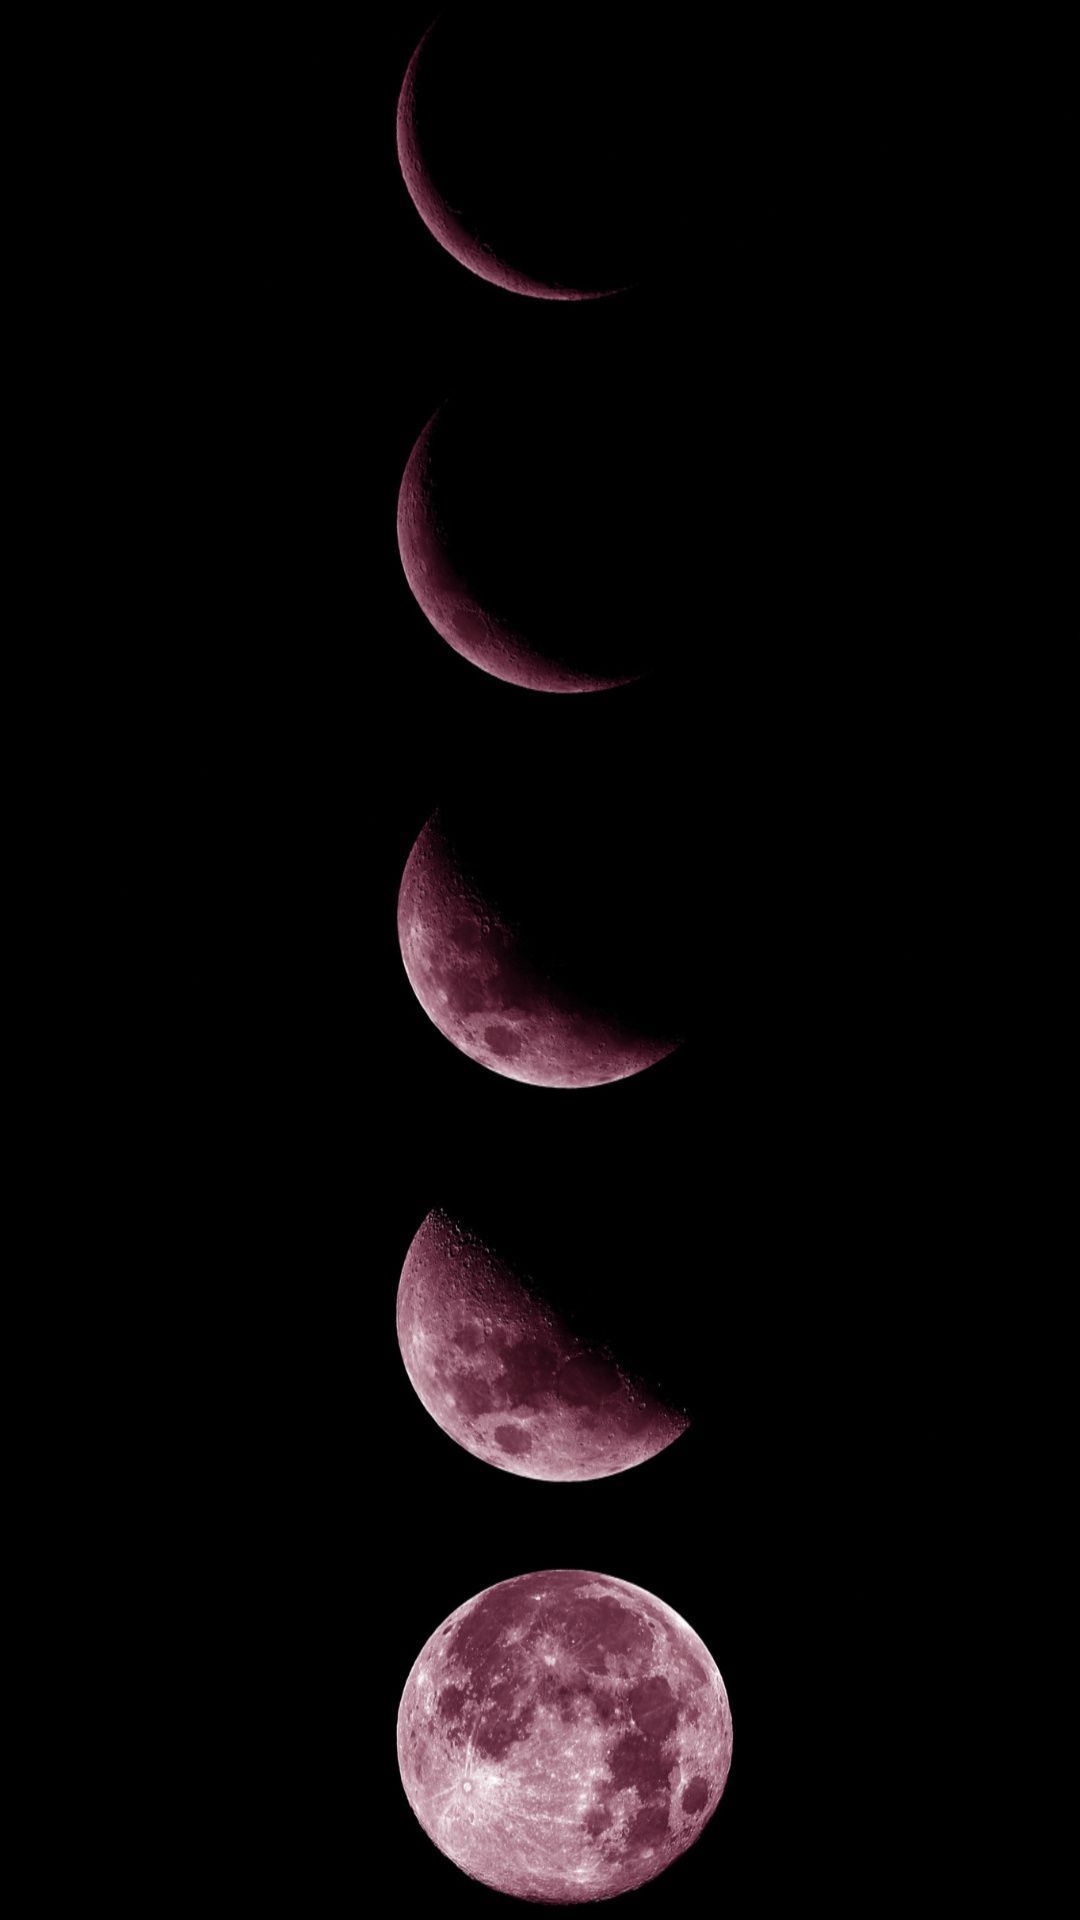 free pink aesthetic phone wallpaper / background. Pink moon wallpaper, Moon and stars wallpaper, iPhone wallpaper moon